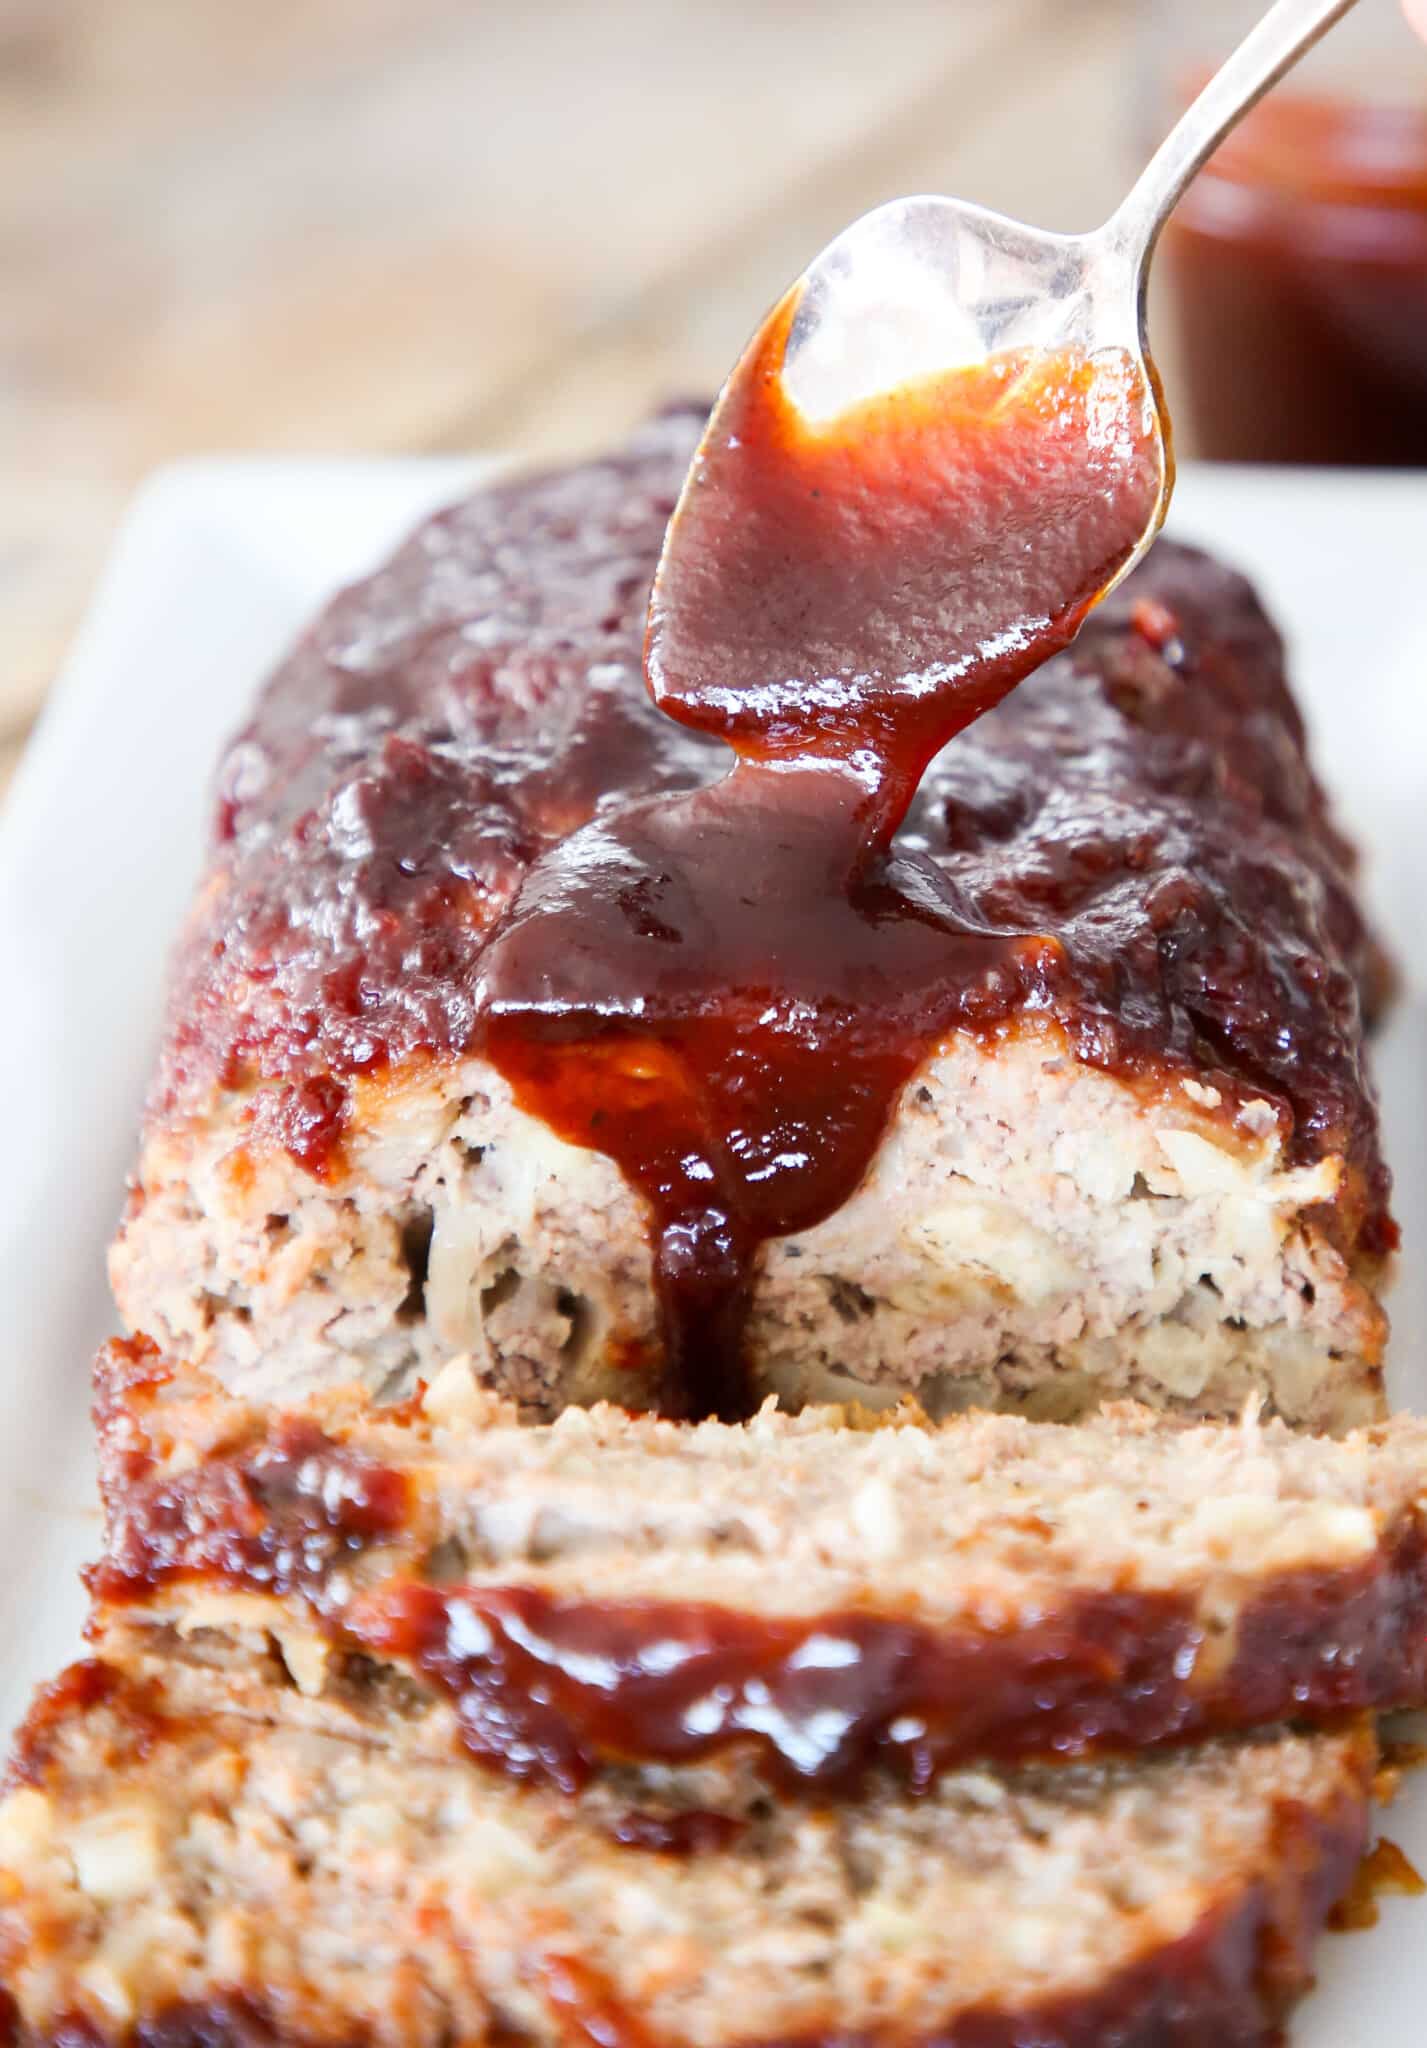 Sliced meatloaf with brown sugar sauce pouring over the top.